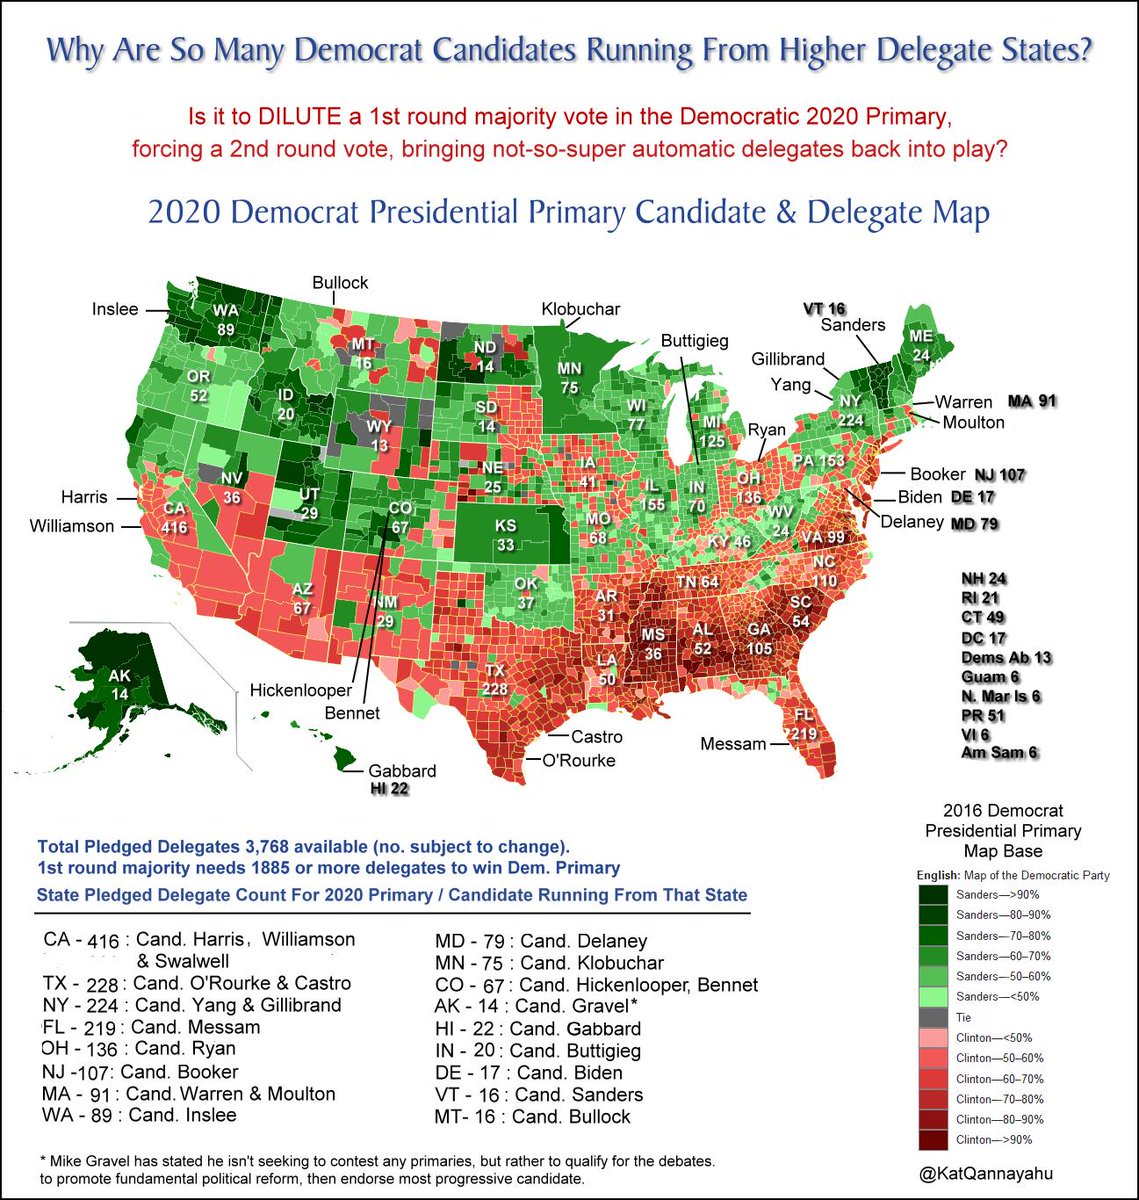 1/Updated  #Democrats 2020 Pres. Primary Candidates & Delegates Map begun mid-Mar. Now 23 candidates. So many candidates from higher pledged del. states is attempt to dilute 1st round majority vote (50%+1), forcing 2nd rnd, bringing Automatic del (not so supers) back into play.